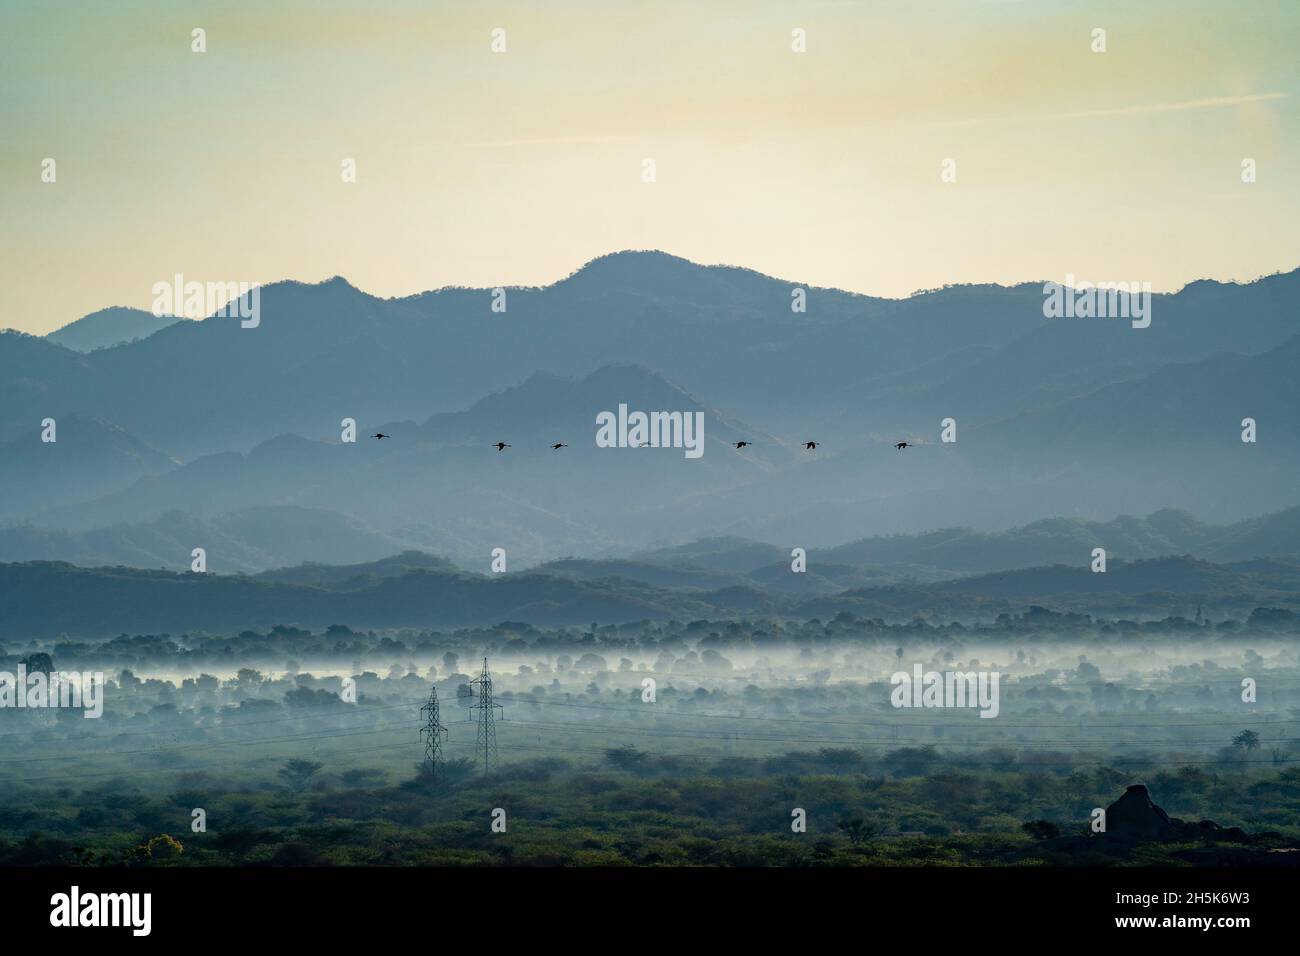 The landscape surrounding a dam lake with birds flying over the desert and silhouette of the Aravali Hills in the Pali Plain of Rajasthan Stock Photo